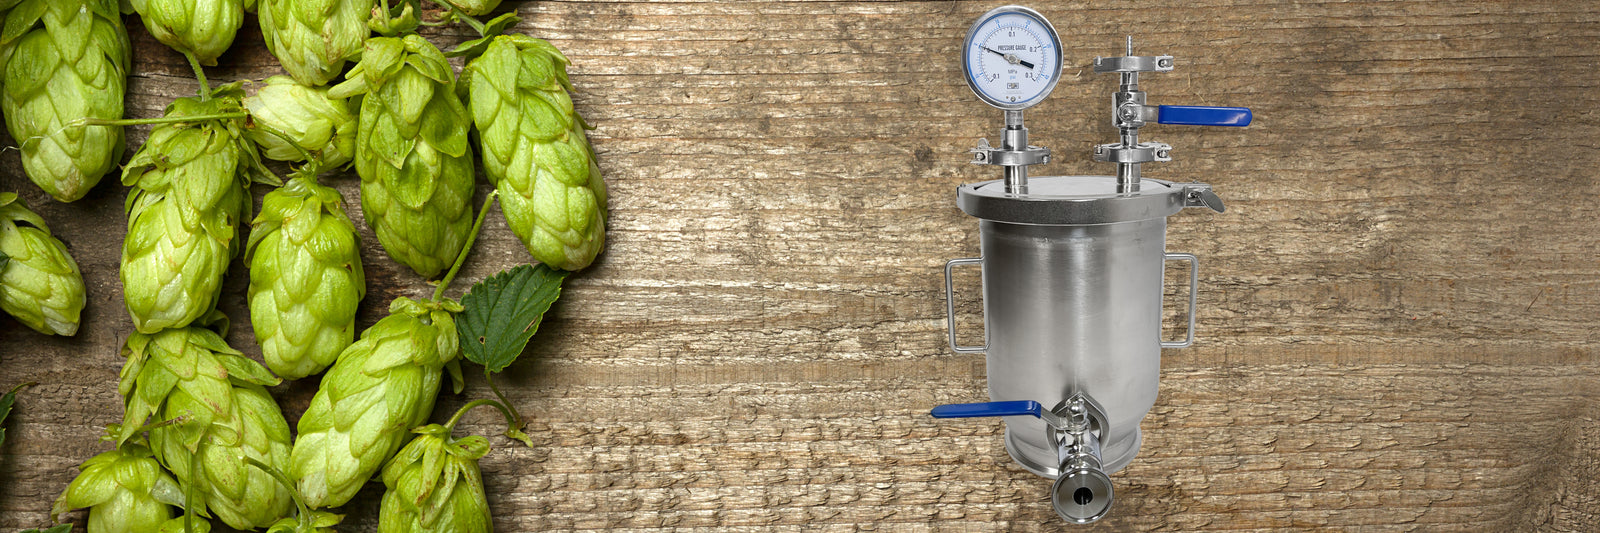 The merits of double dry-hopping